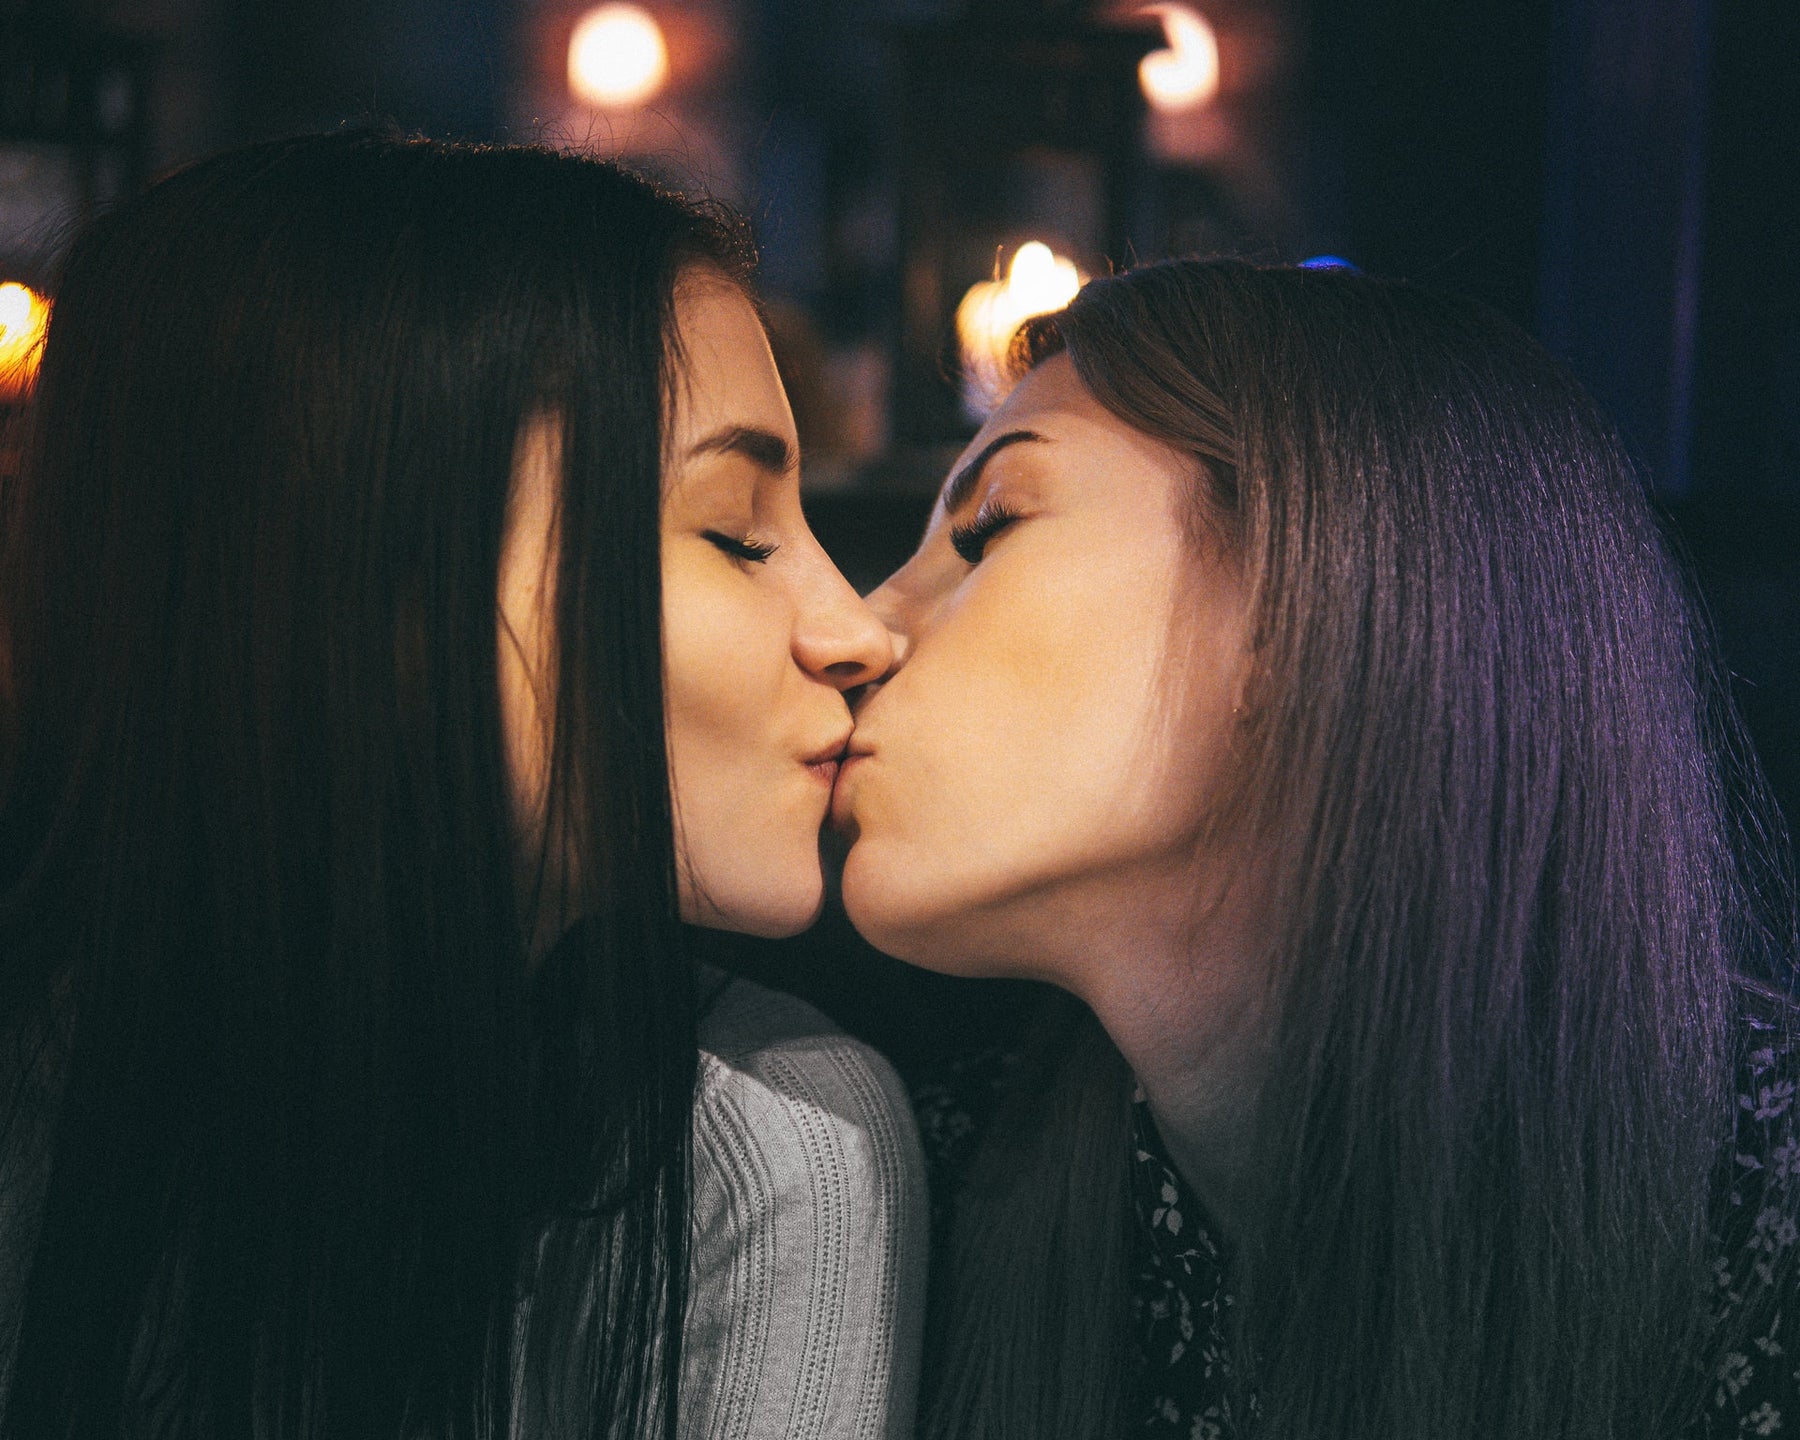 Girl-On-Girl: Five Tips to Have the Best Lesbian Sex of Your Life